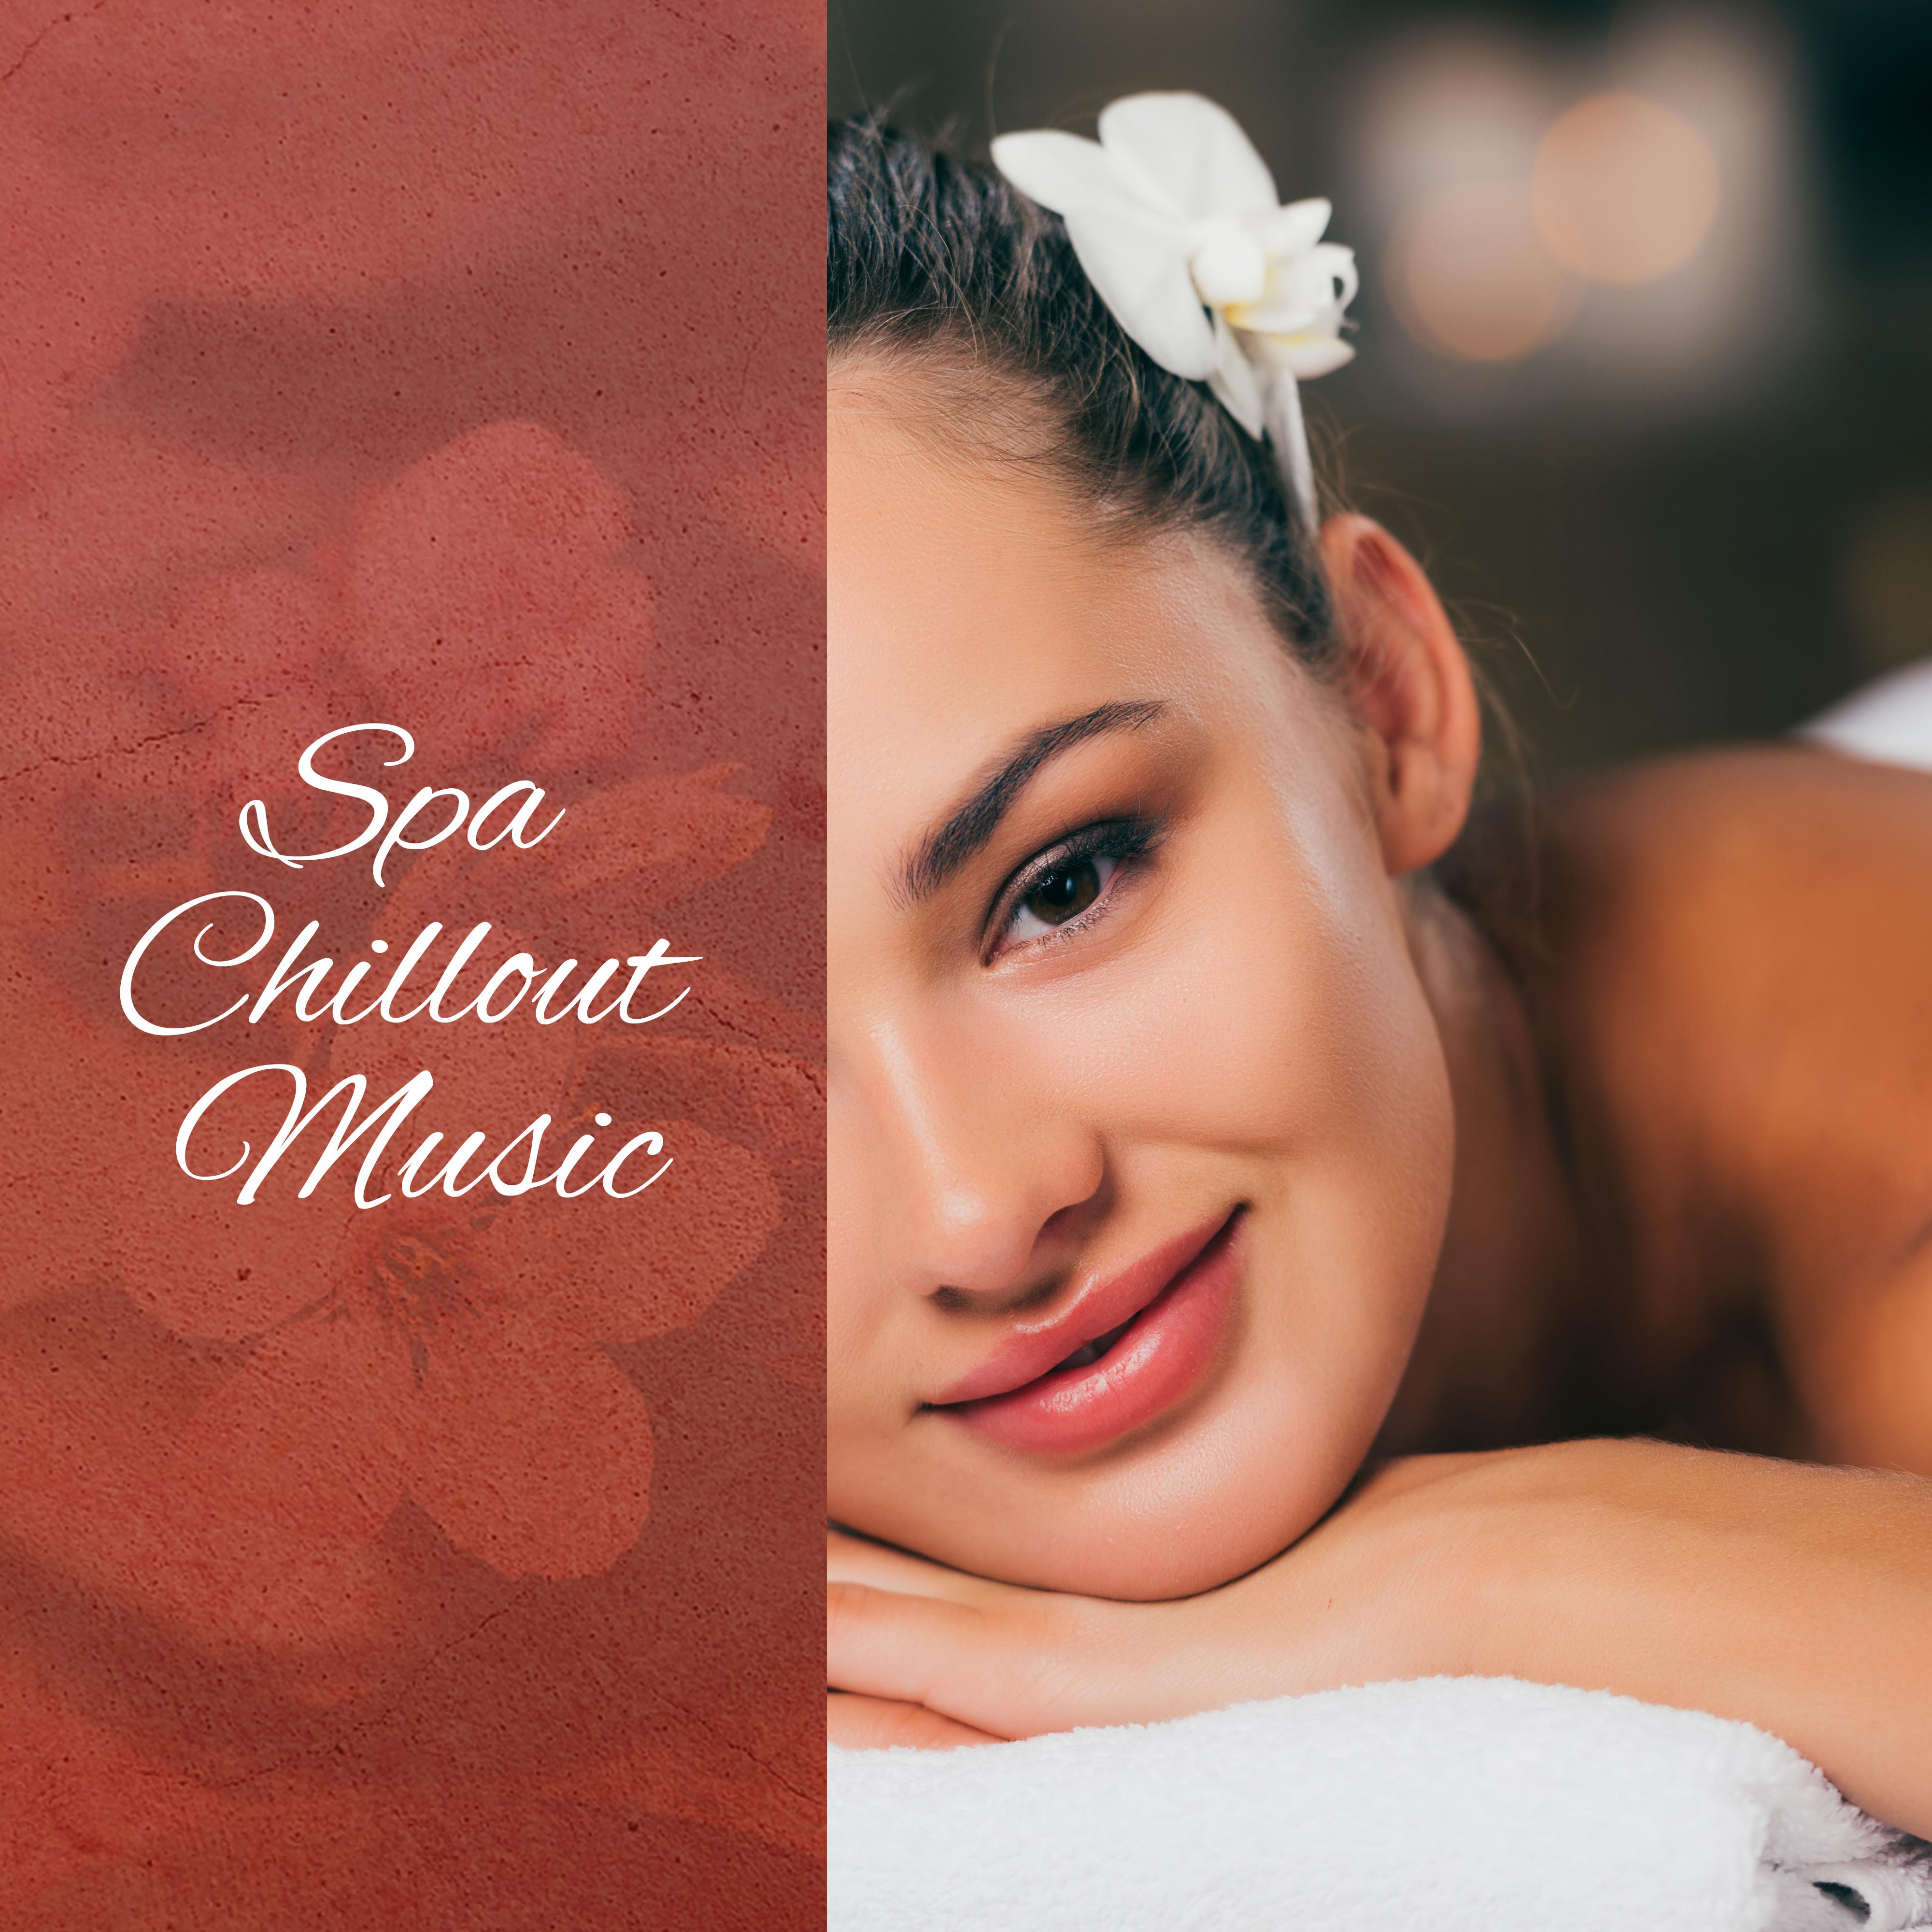 Spa Chillout Music – Relaxing Songs for Massage, Spa, Sleep, Wellness, Deep Relaxation, Pure Zen, Massage Music, Peaceful Melodies to Calm Down